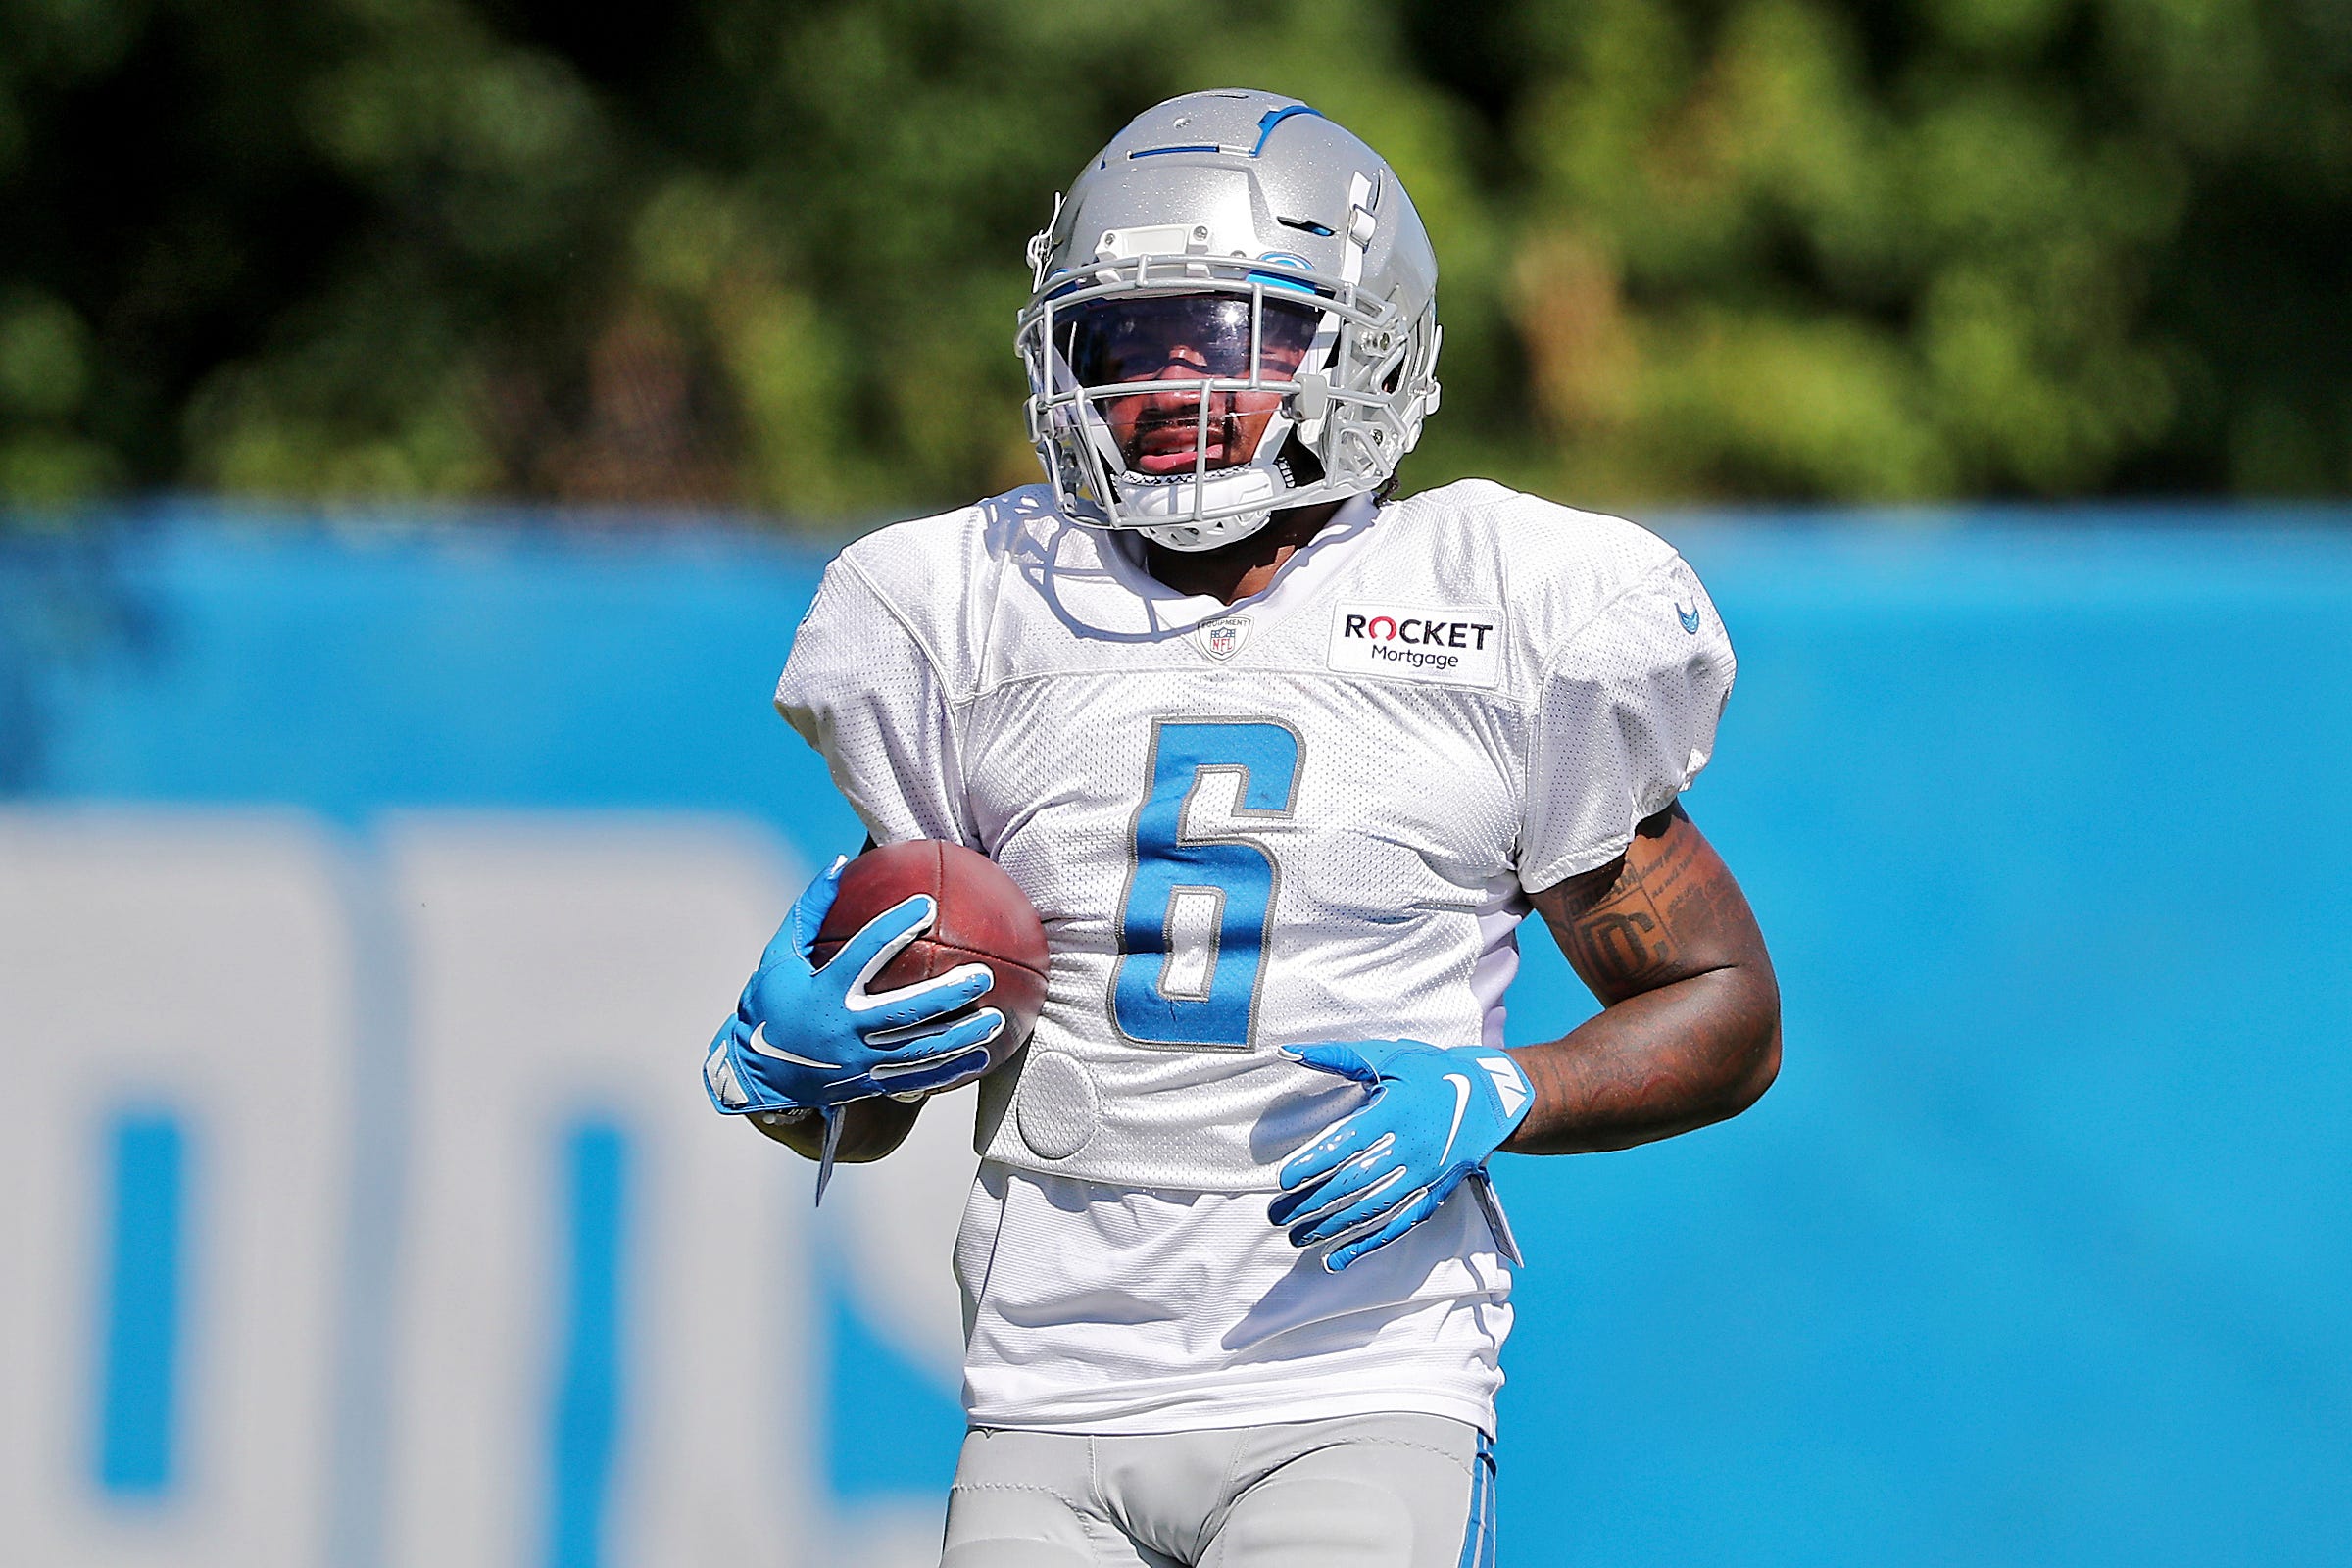 Injury leaving Detroit Lions rookie RB D'Andre Swift behind